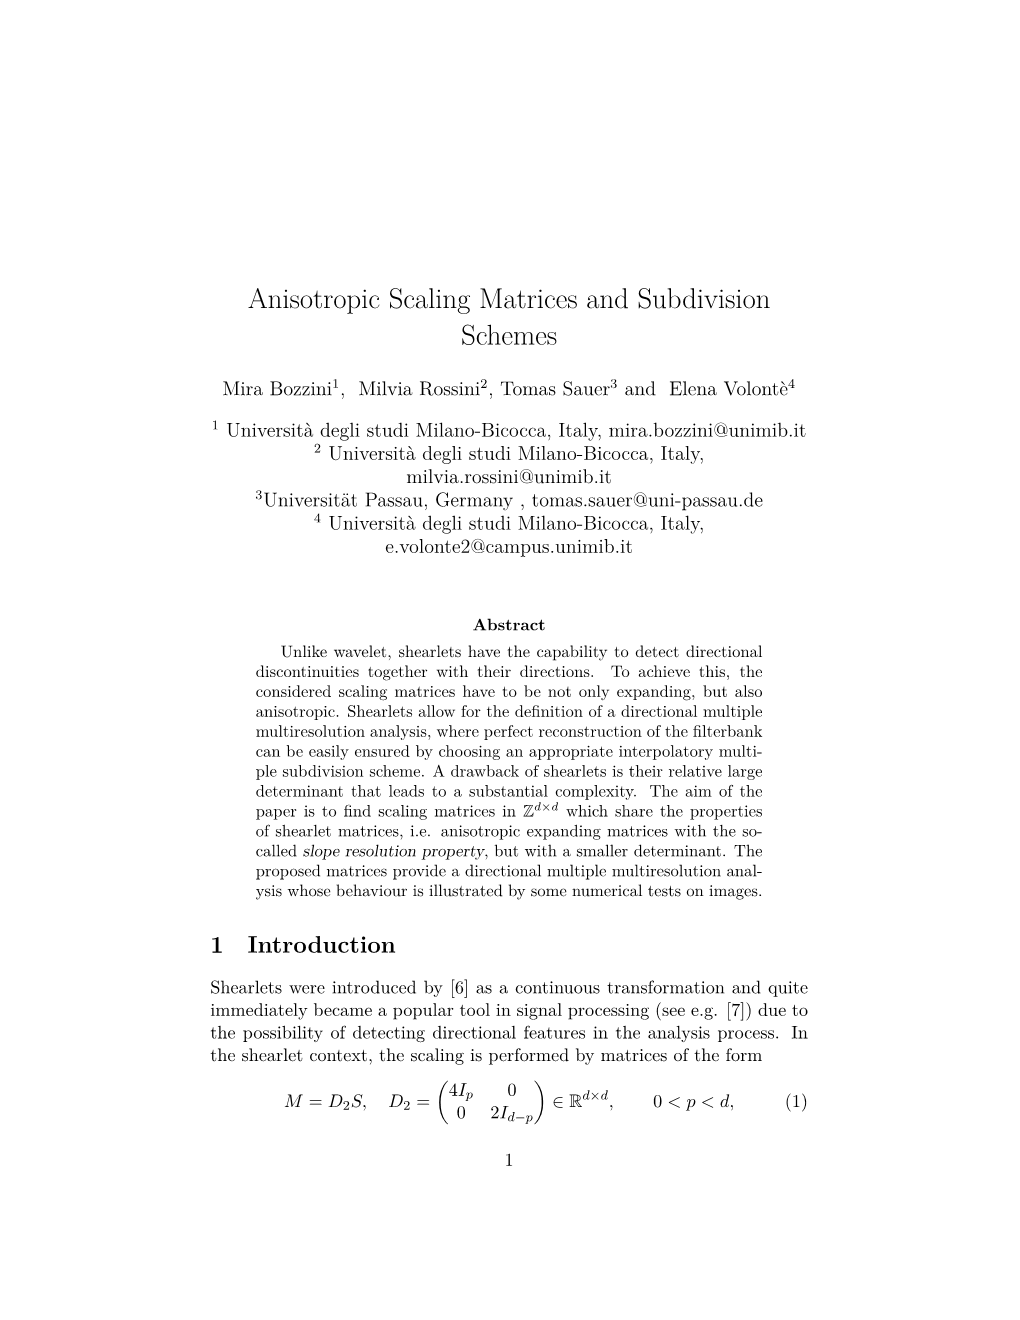 Anisotropic Scaling Matrices and Subdivision Schemes